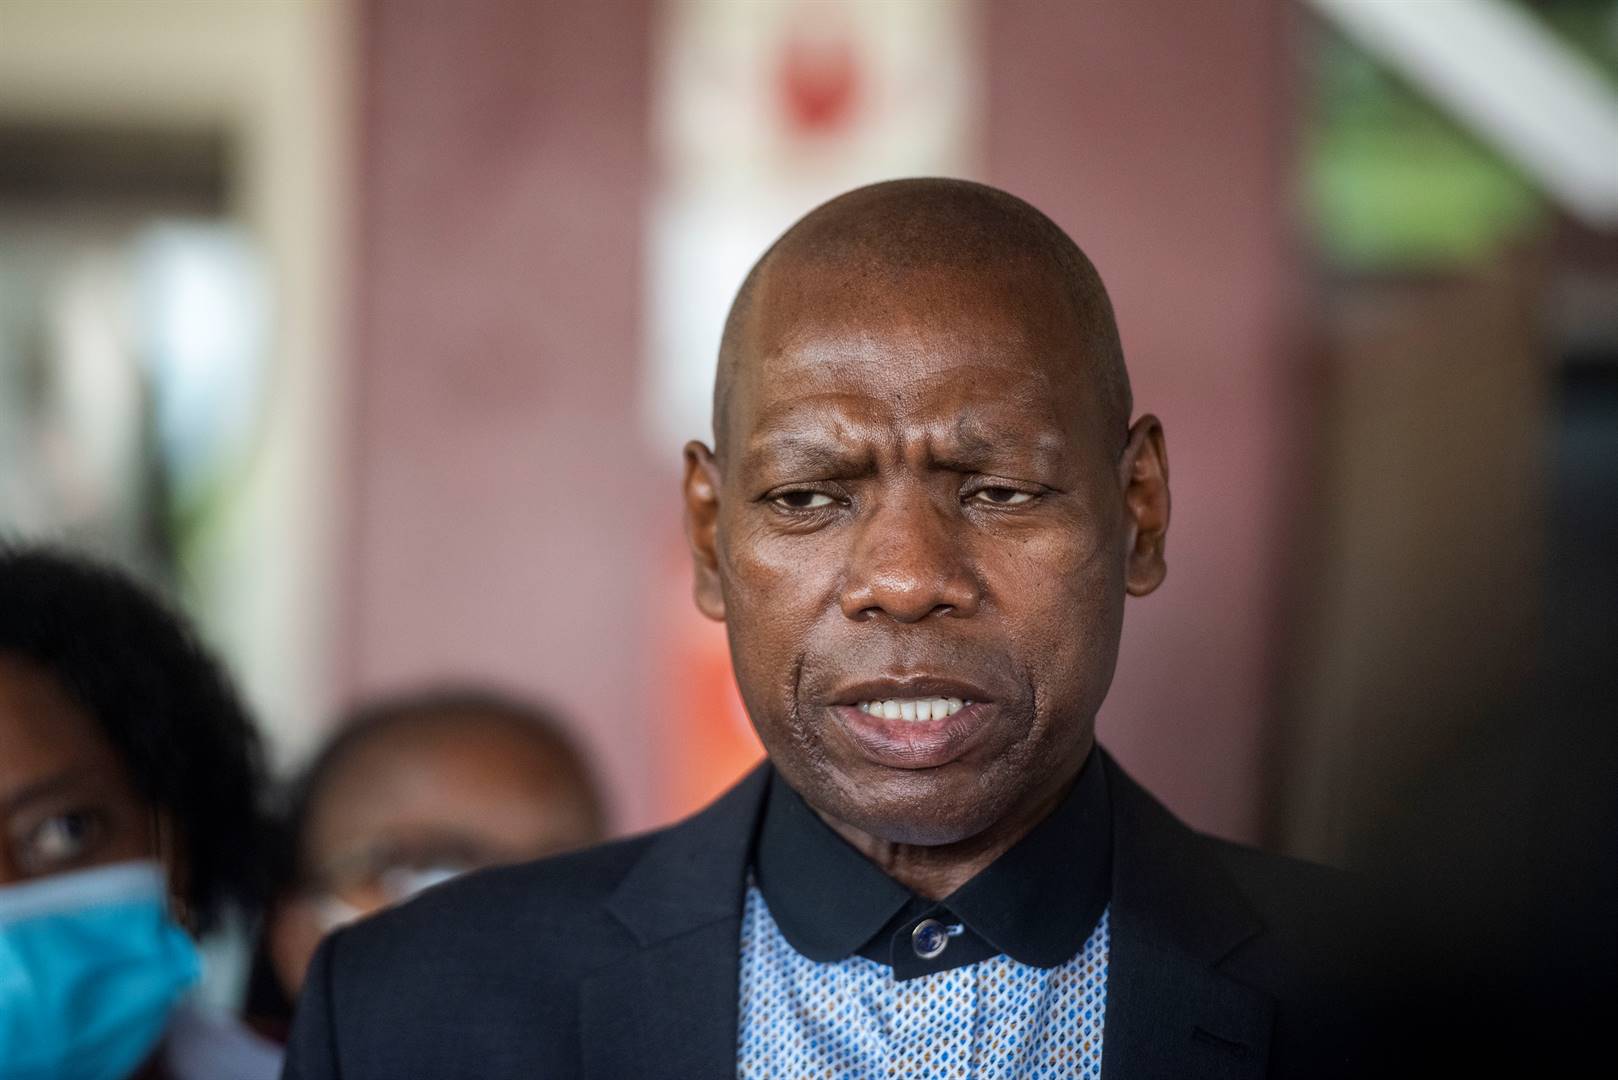 Health Minister Zweli Mkhize conducts an oversight visit to Steve Biko Academic Hospital in Pretoria earlier this month. Criticism has been levelled at government for its communication failures. Picture: Gallo Images